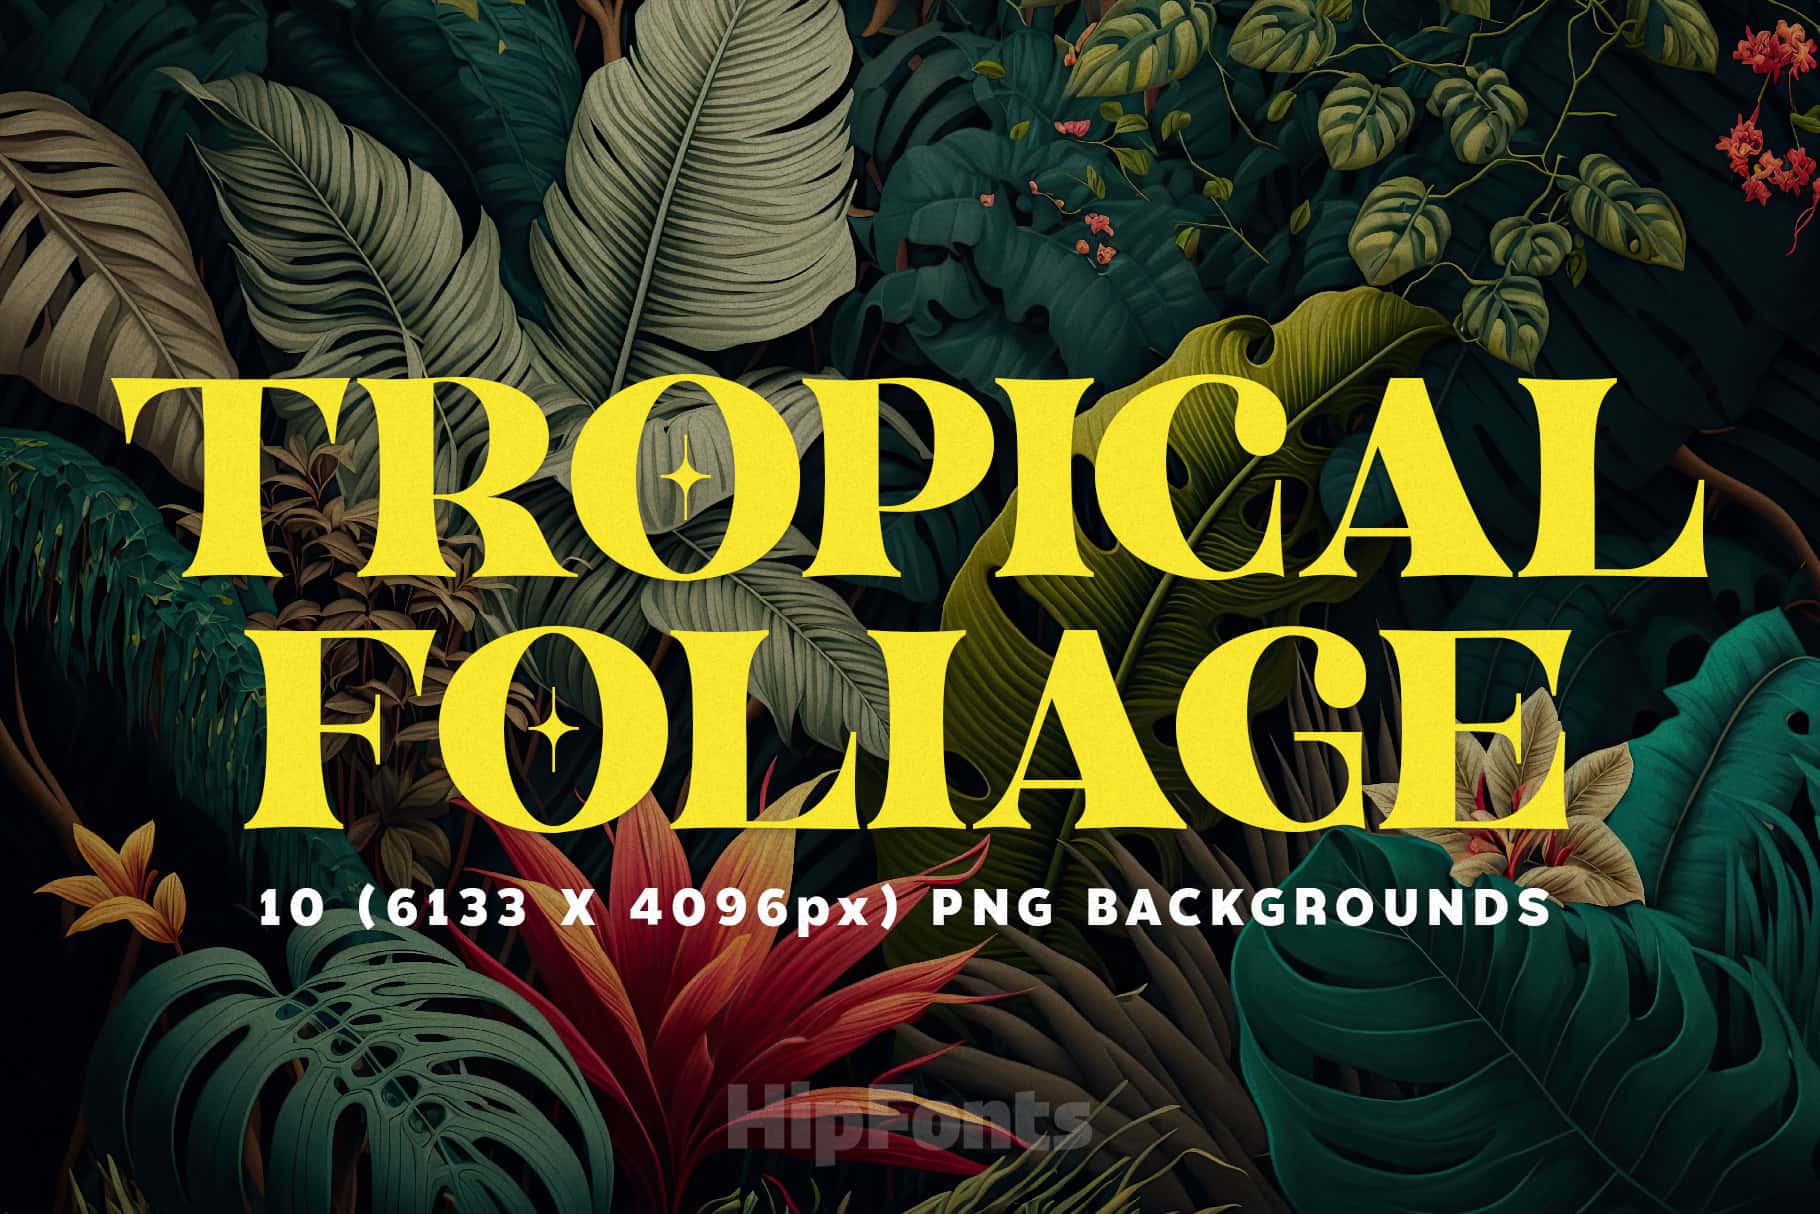 Tropical Foilage Backgrounds Cover